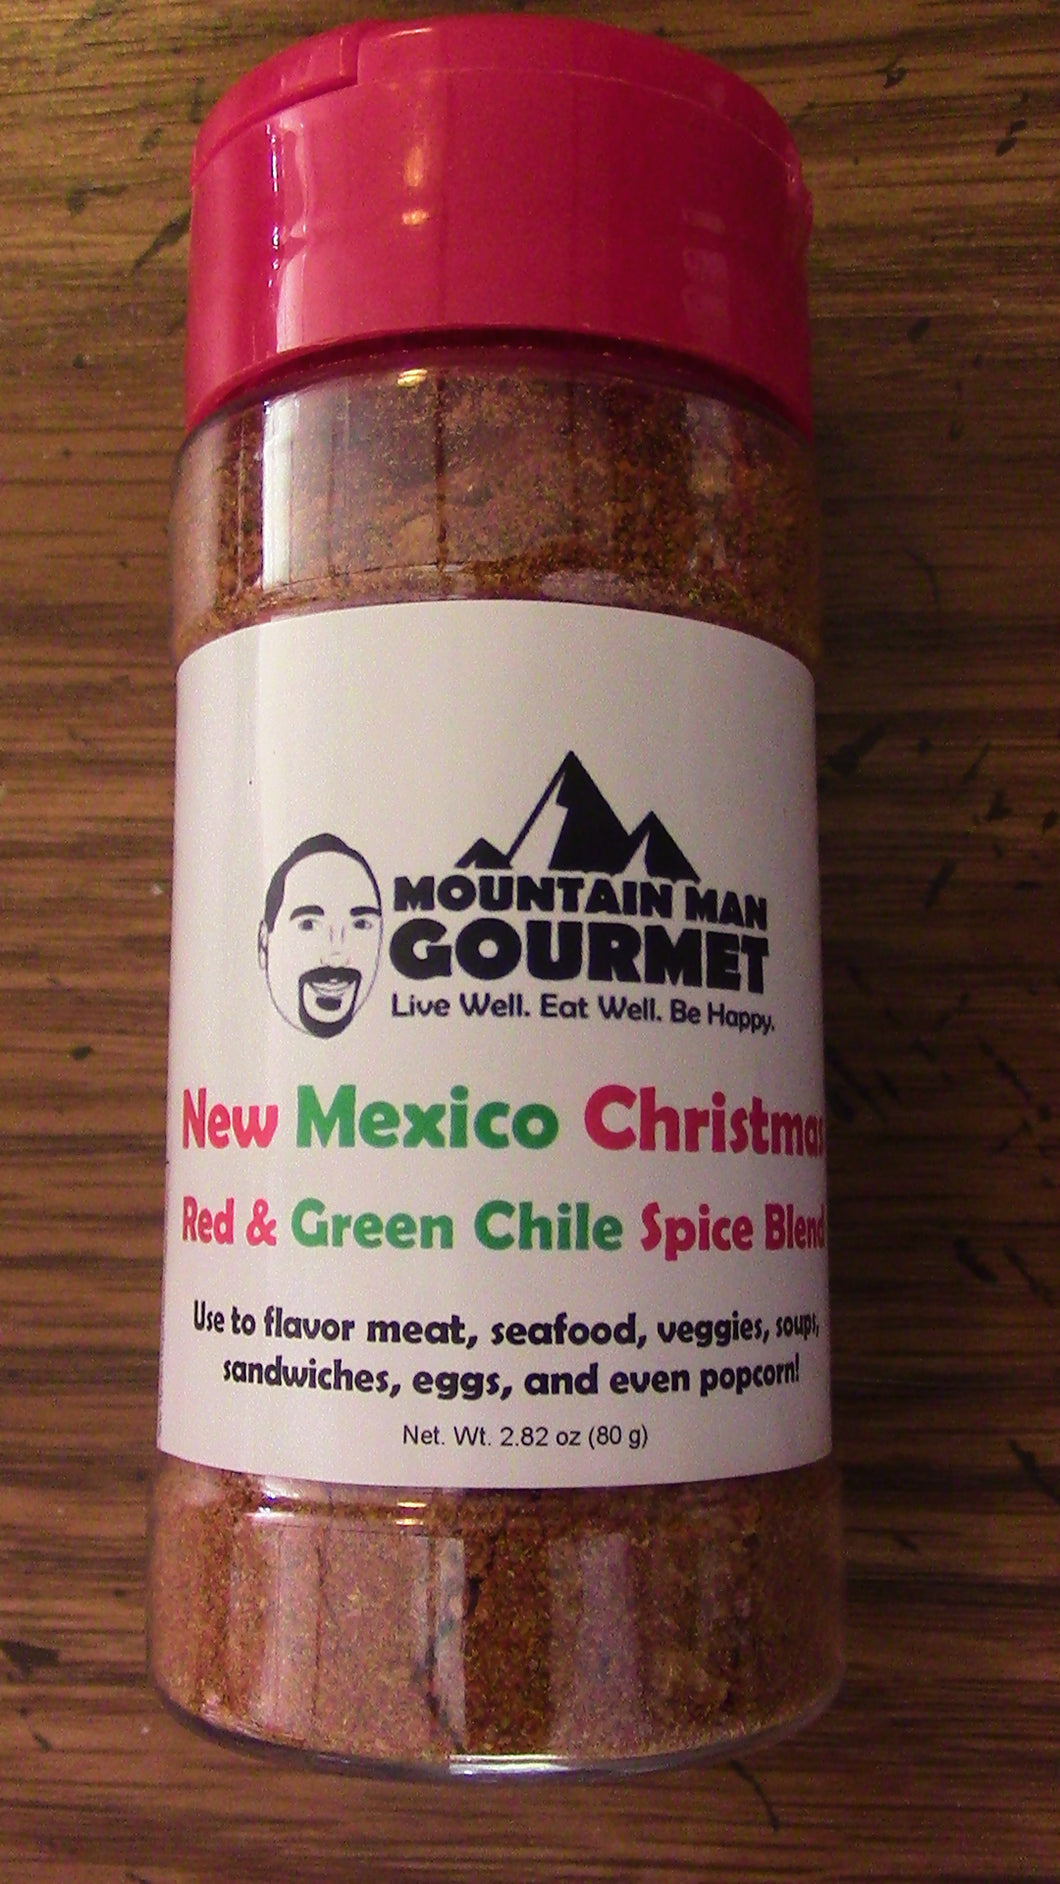 New Mexico Christmas Spice Blend